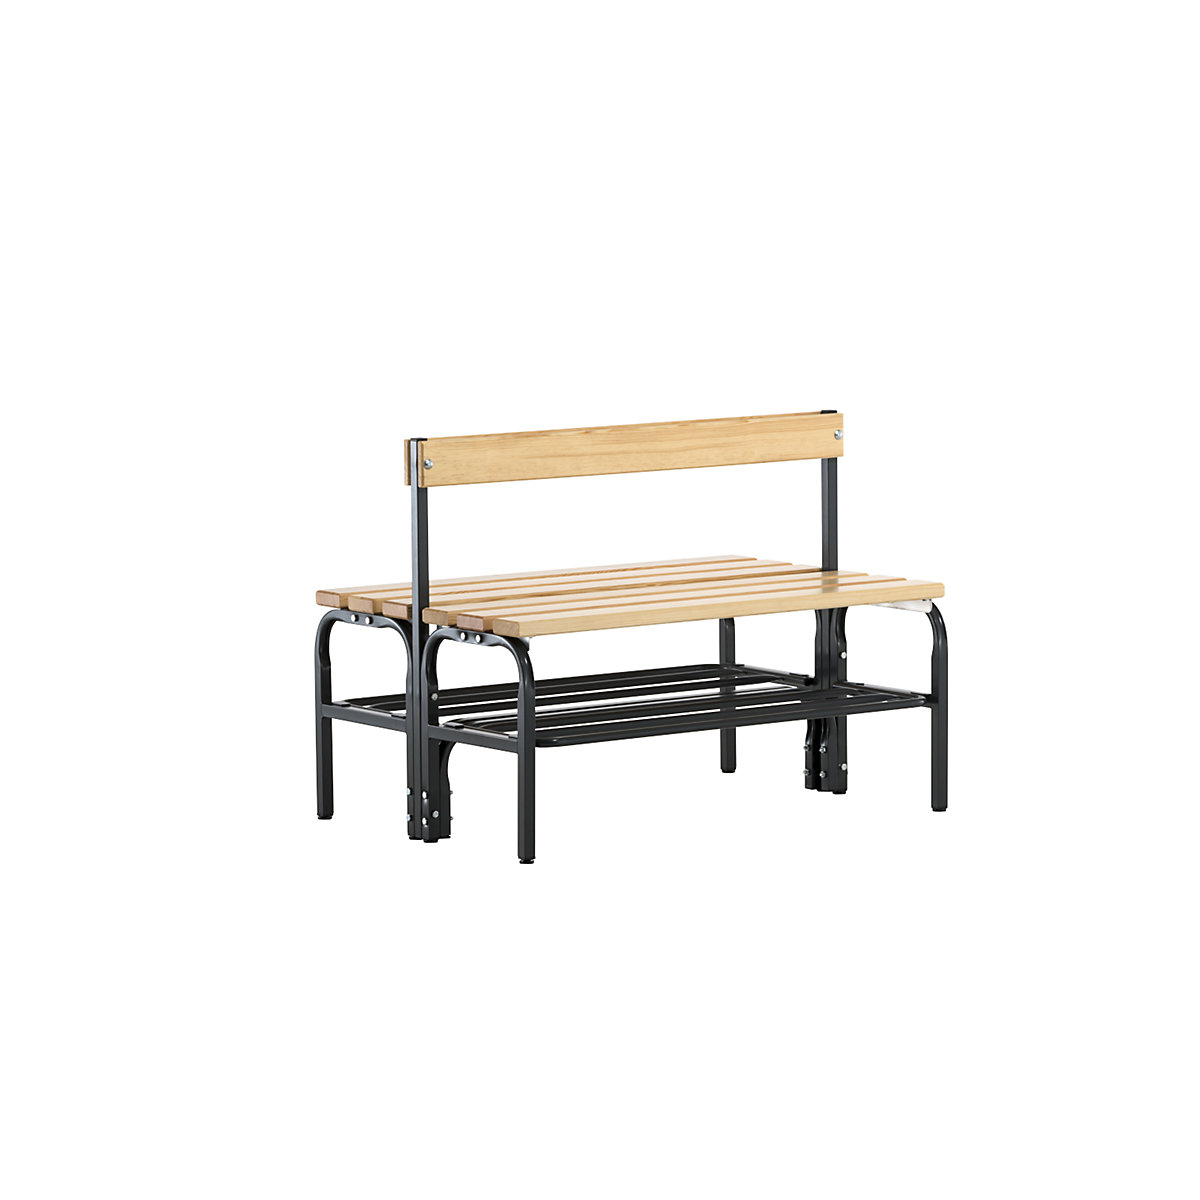 Half height cloakroom bench with back rest, double sided – Sypro, pine wood slats, length 1015 mm, charcoal, shoe rack-8